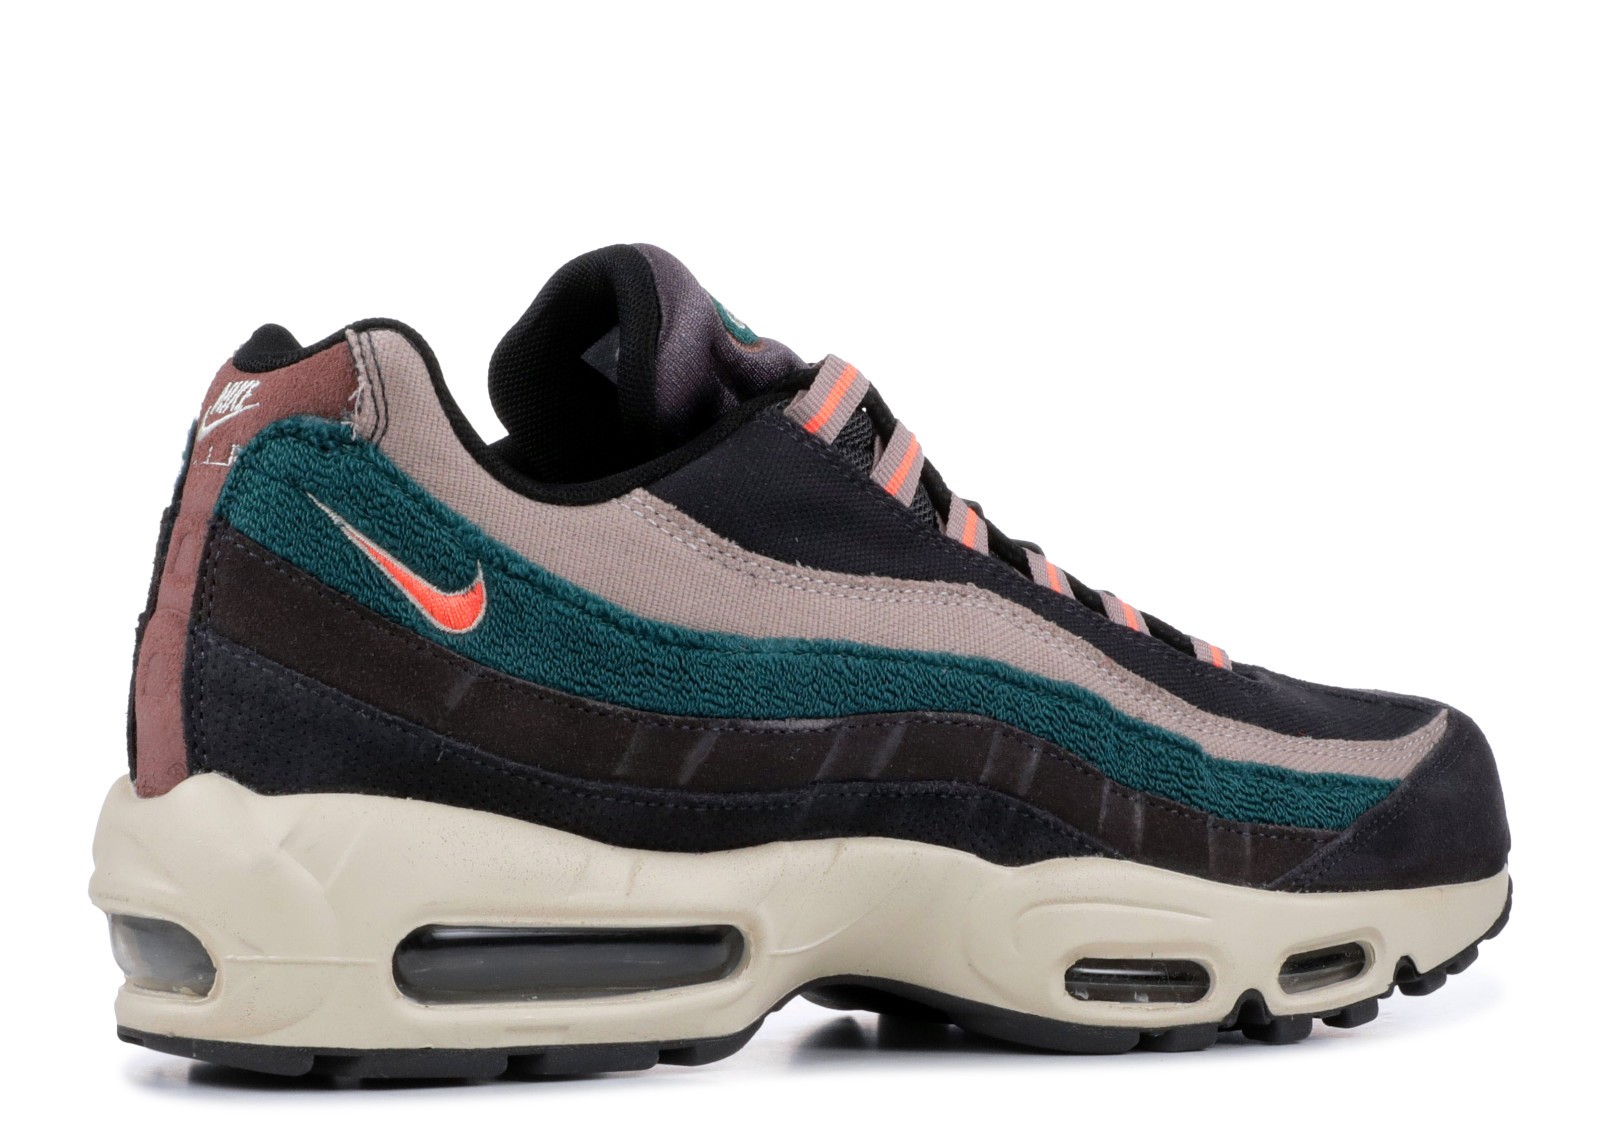 nike shoes prices germany today time schedule - Nike Max 95 Grey Rainforest Bright 538416 - 018 - RvceShops